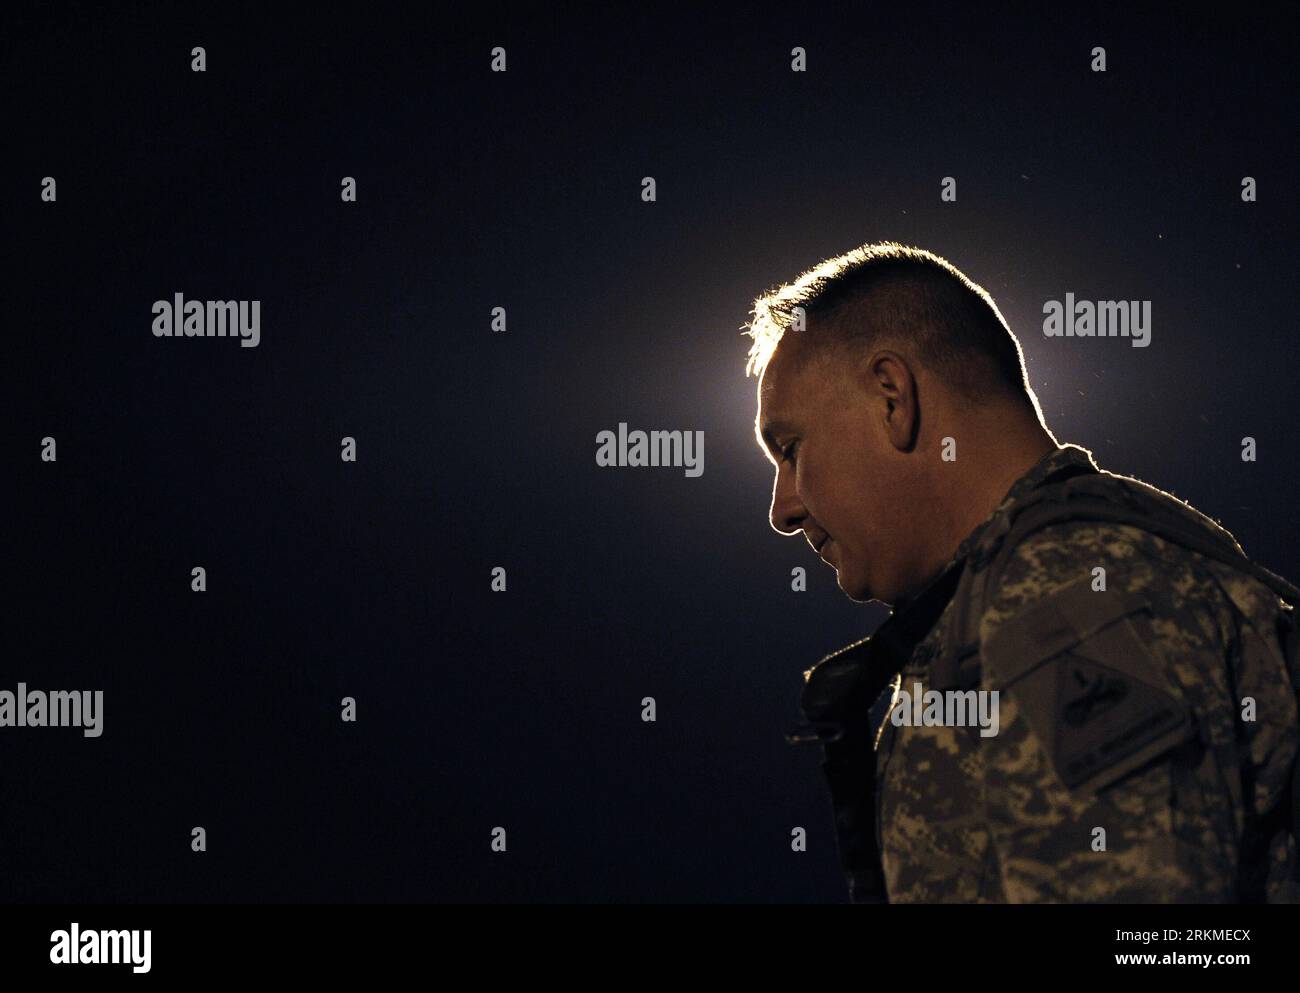 Bildnummer: 56693228  Datum: 12.12.2011  Copyright: imago/Xinhua (111213) -- EL PASO (TEXAS), Dec. 13, 2011 (Xinhua) -- A soldier from 4th Brigade, 1st Armored Division, US Army, arrives at Fort Bliss in El Paso of Texas, the United States, Dec. 12, 2011. Some 270 soldiers of 4th Brigade returned from Iraq and reunited with their family on Monday. U.S. military forces are to pull out completely from Iraq by the end of 2011, according to a security pact, named Status of Forces Agreement (SOFA), signed late in 2008 between Baghdad and Washington. (Xinhua/Zhang Jun)(zcc) U.S.-EL PASO-SOLDIERS-HOM Stock Photo